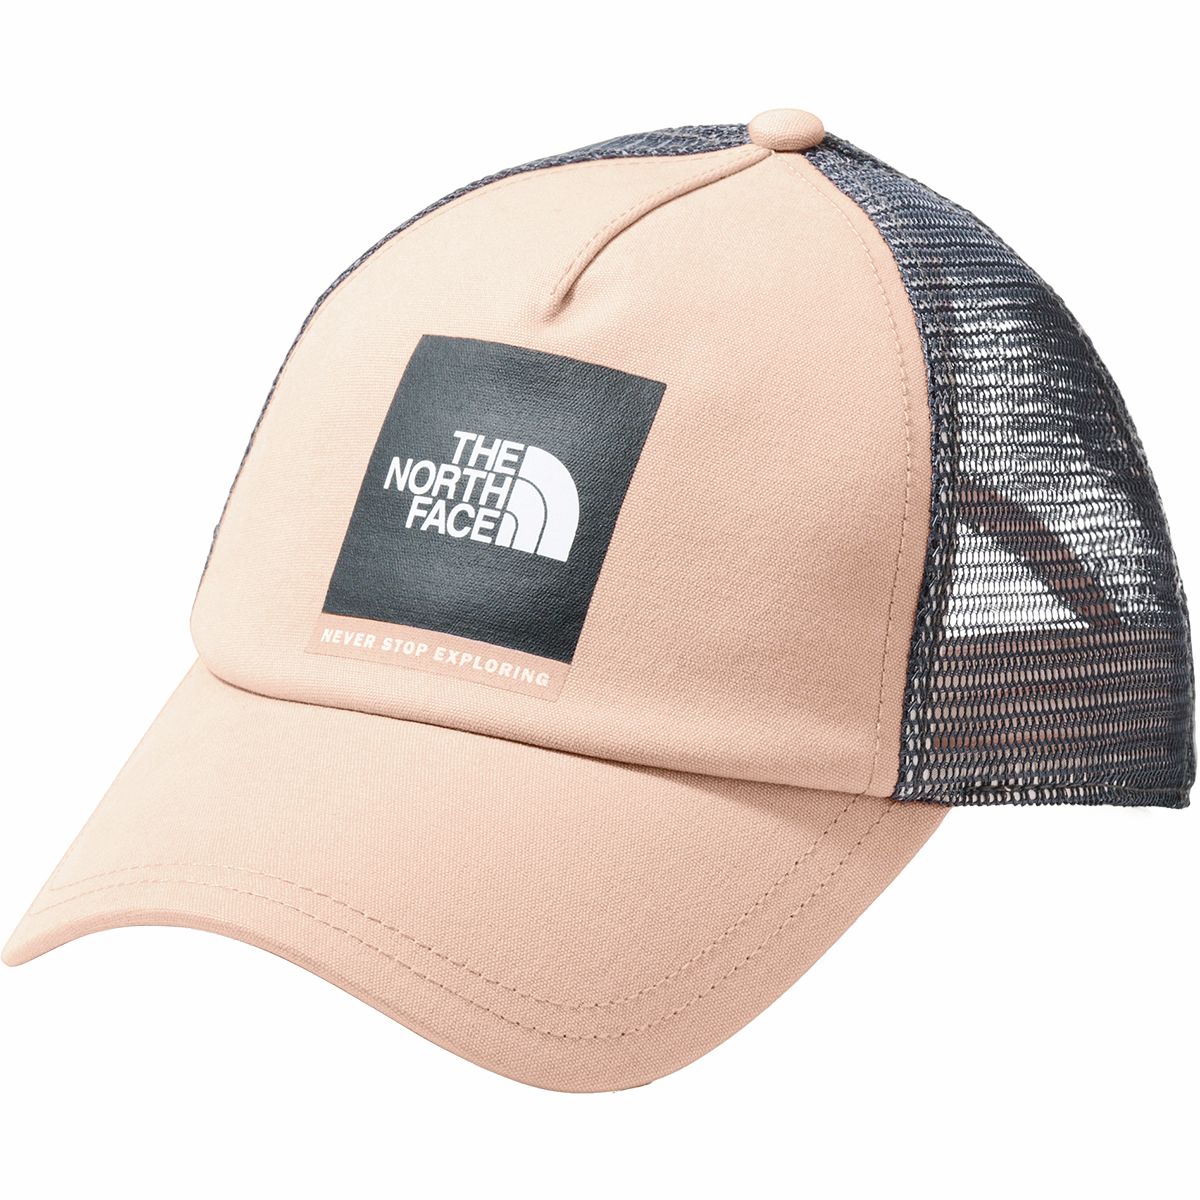 The North Face Low Pro Trucker Hat - Women's | Backcountry.com